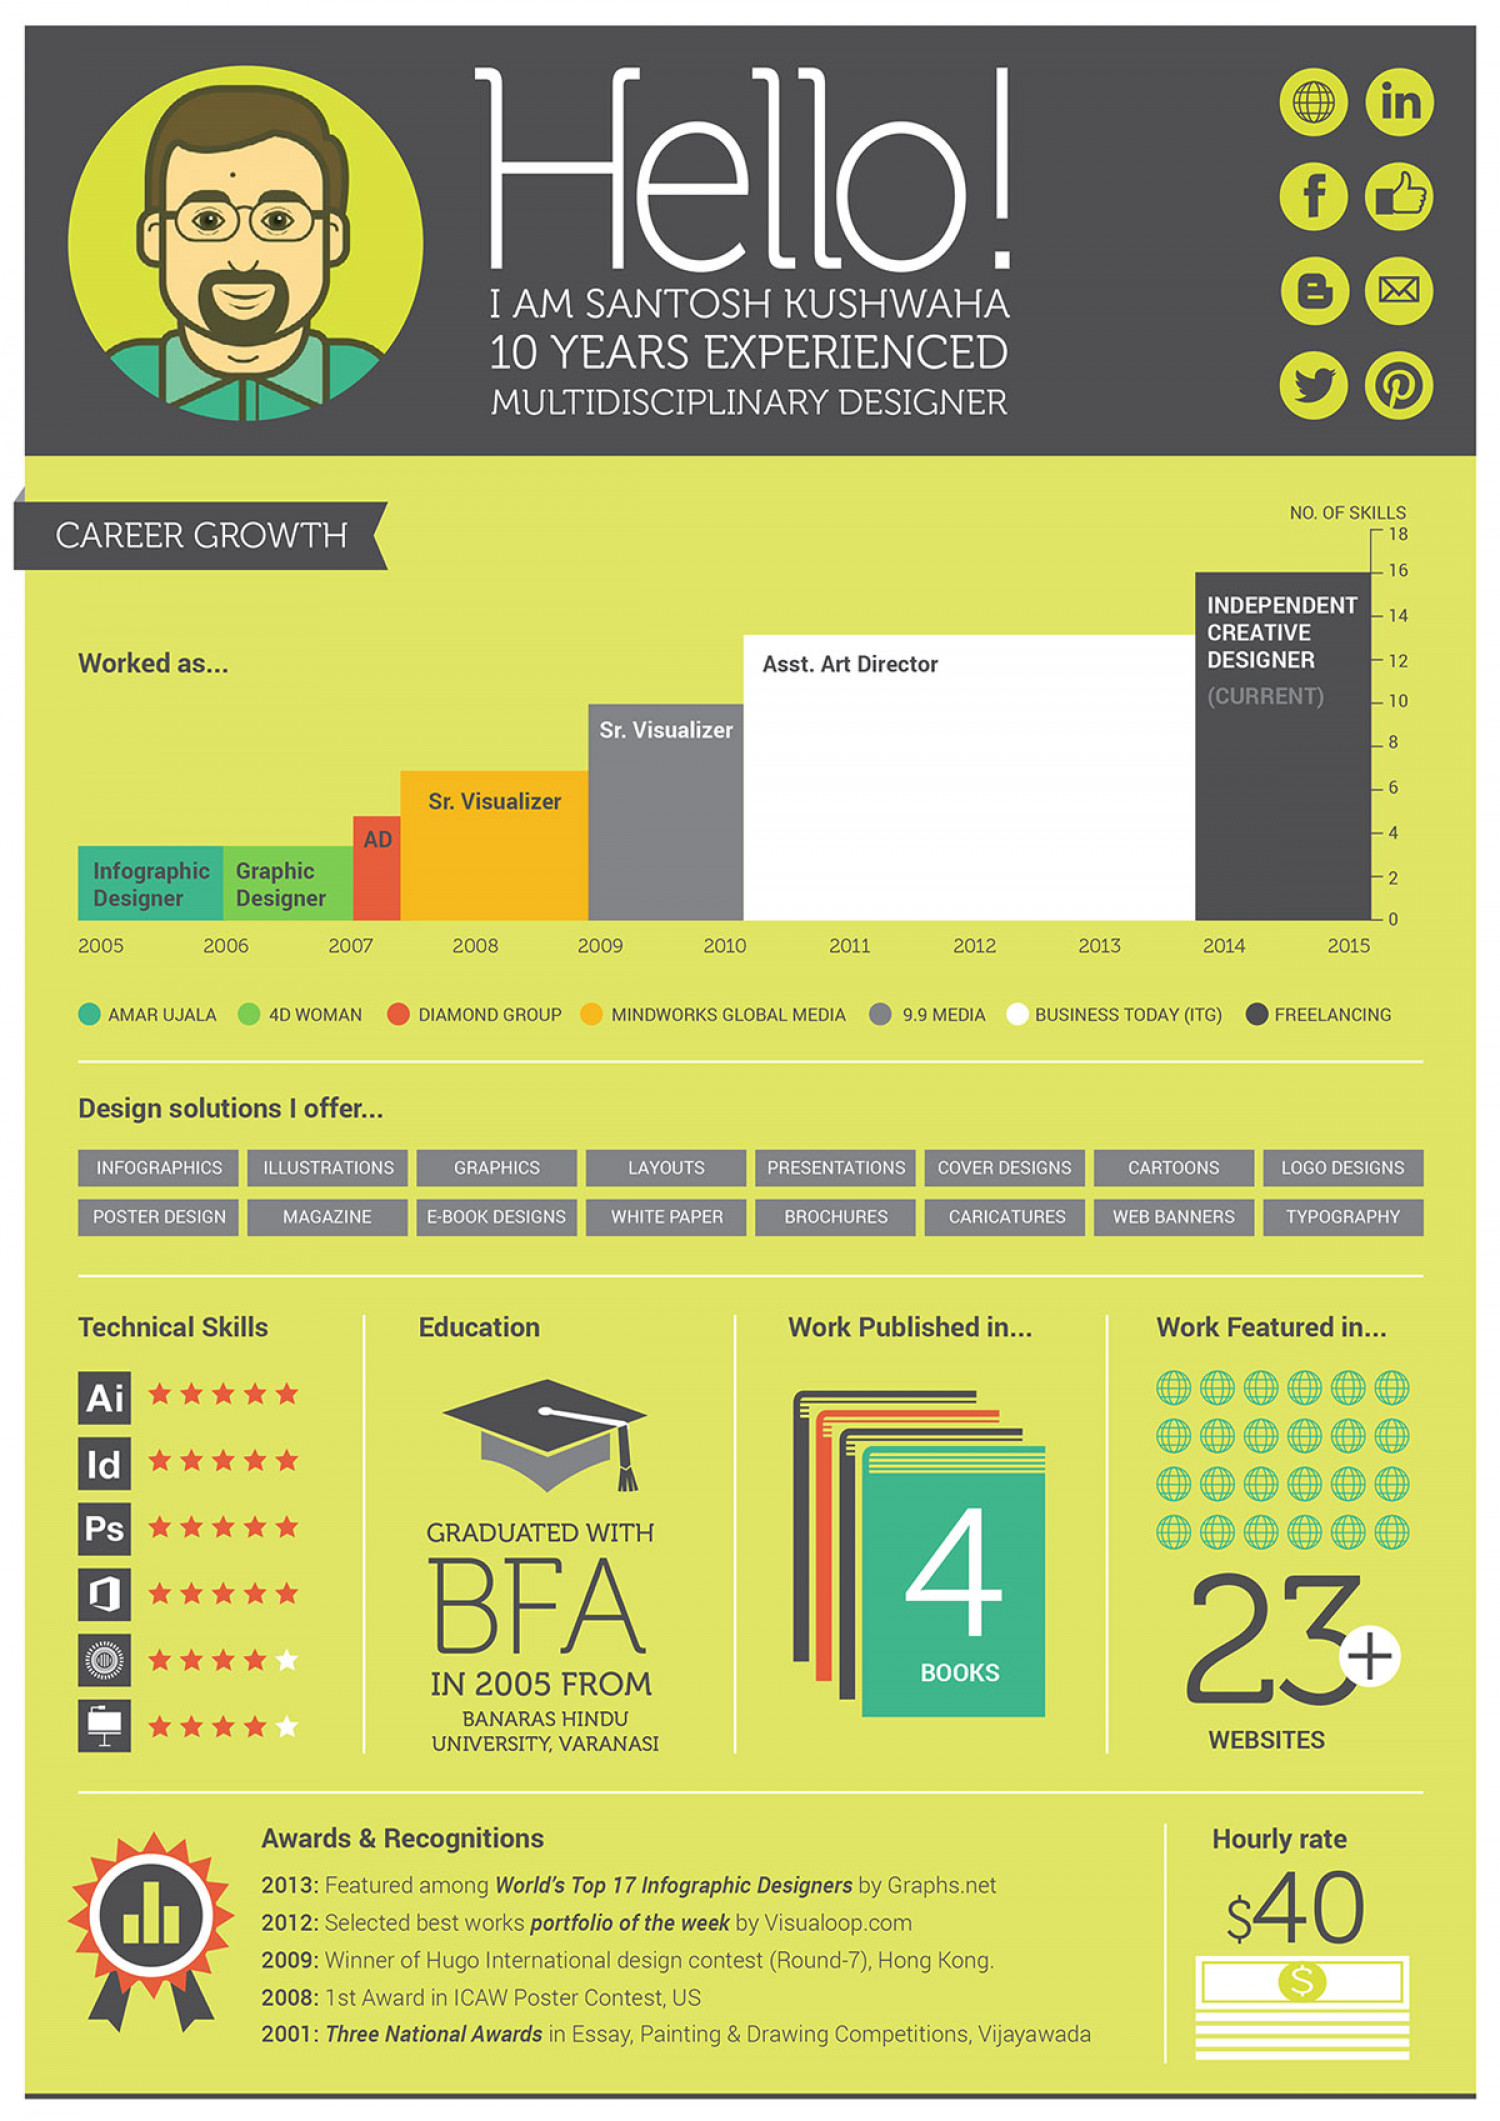 How to Create a Polished Infographic Resume [Infographic] - Business 2 Community